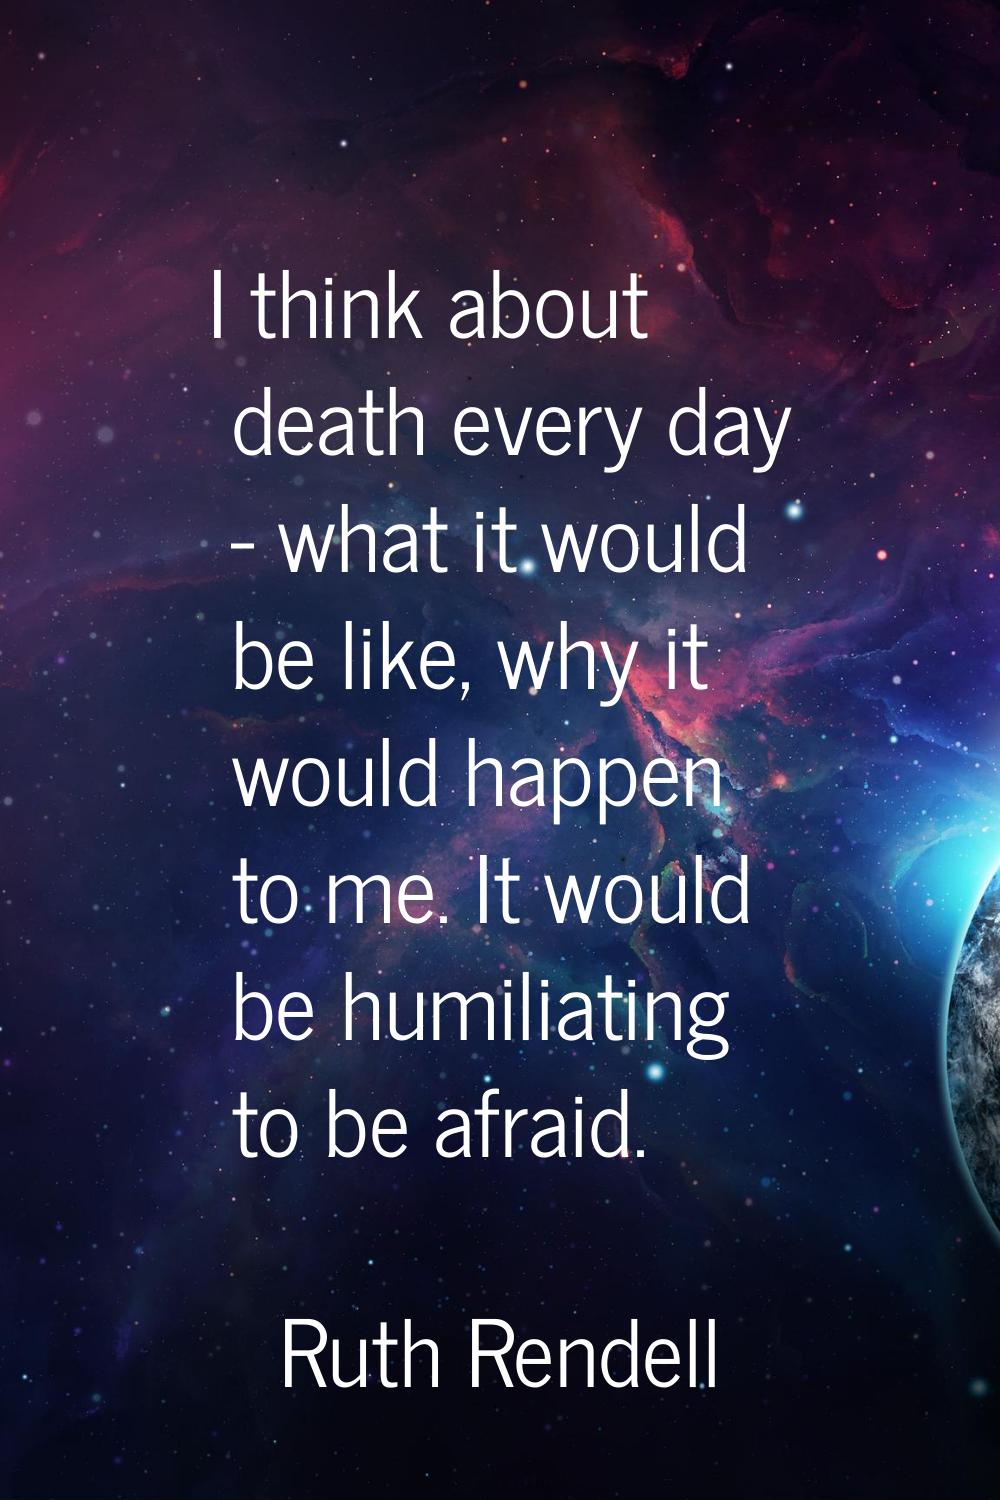 I think about death every day - what it would be like, why it would happen to me. It would be humil